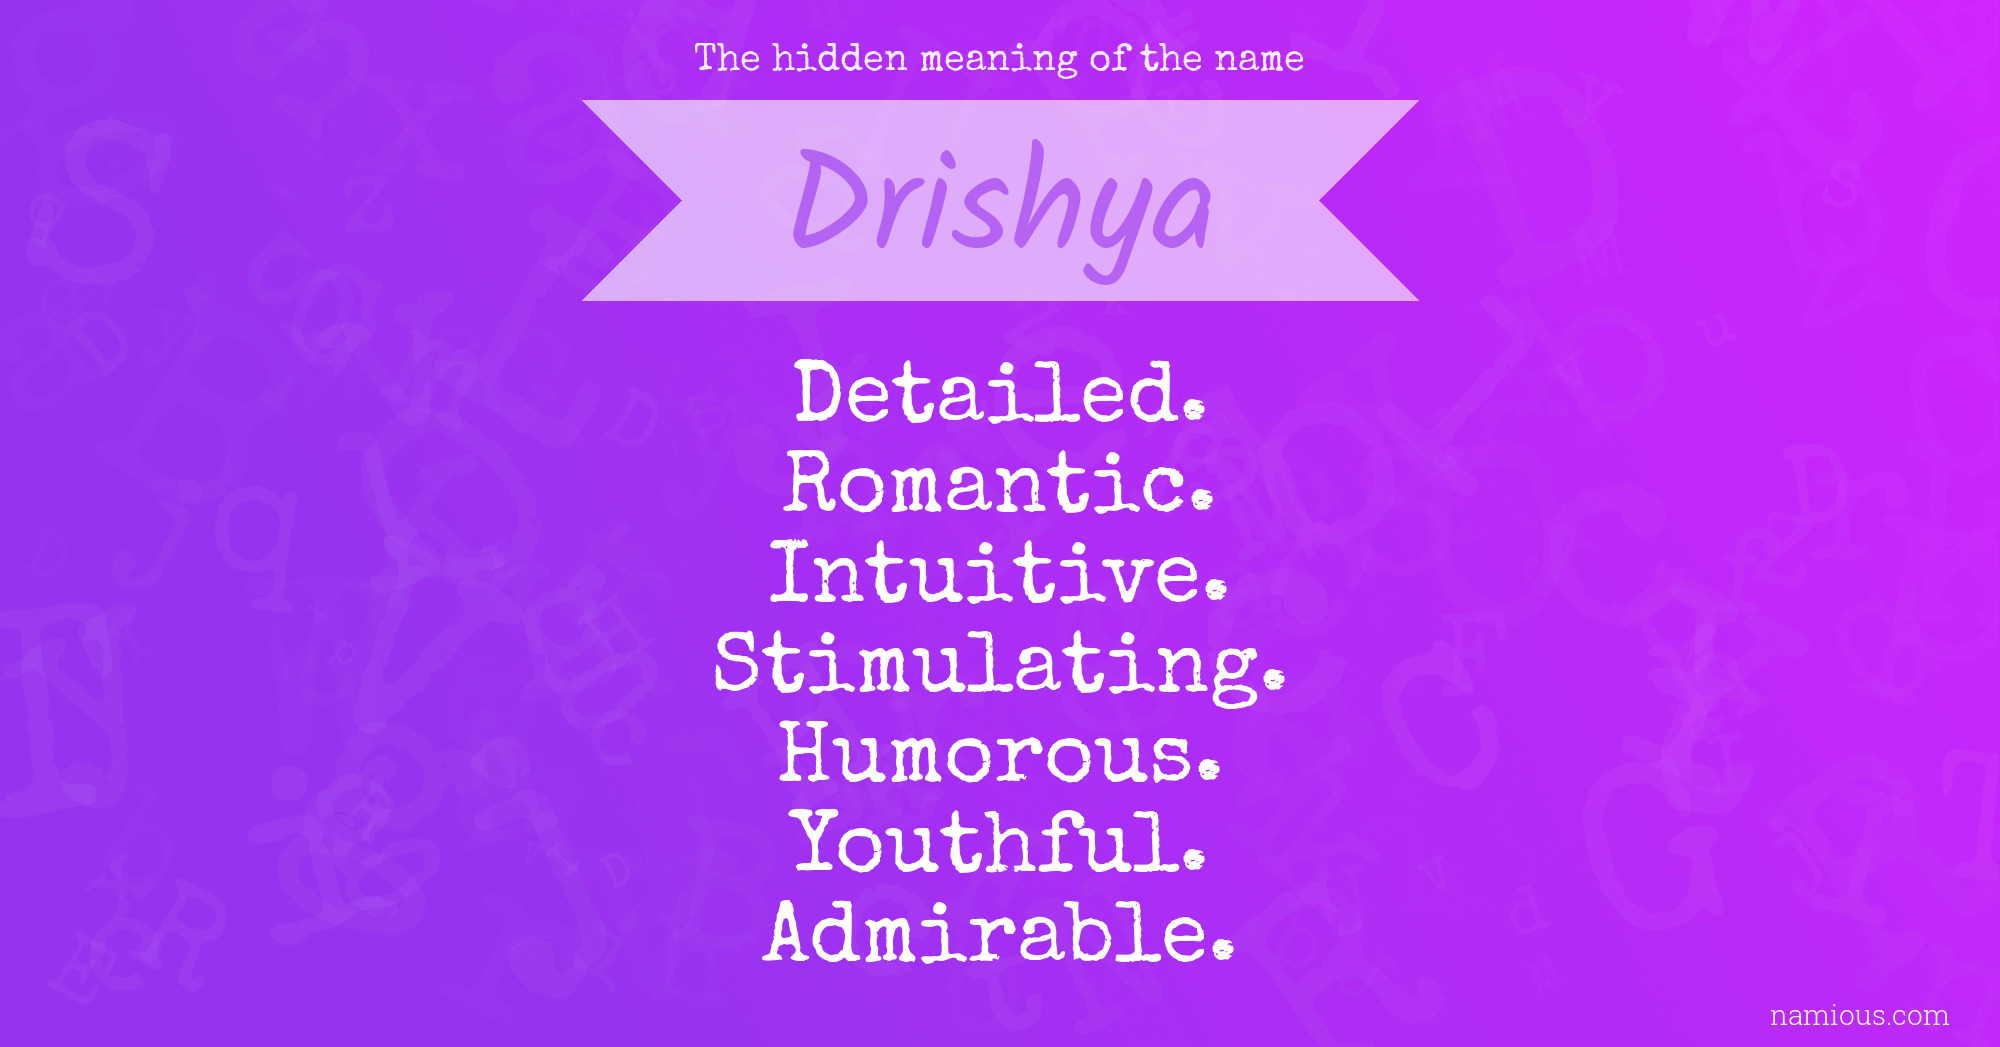 The hidden meaning of the name Drishya